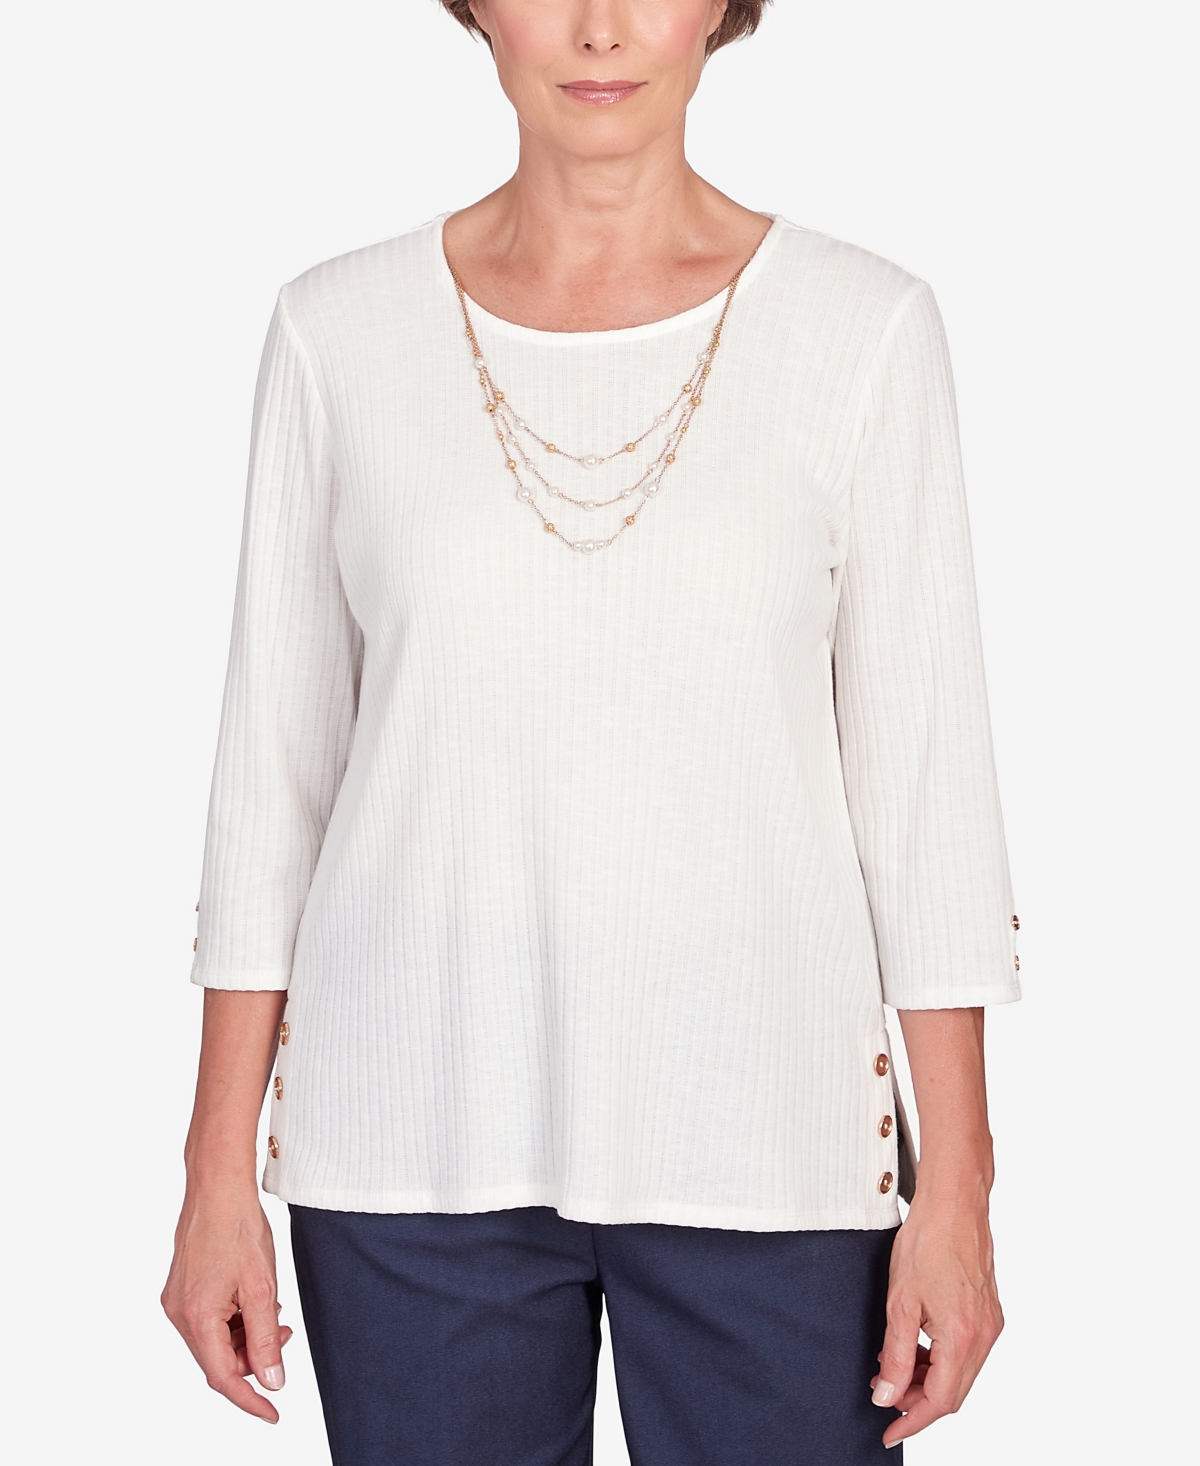 ALFRED DUNNER WOMEN'S ST. MORITZ SOLID KNIT FLUTTER SLEEVE TOP WITH NECKLACE